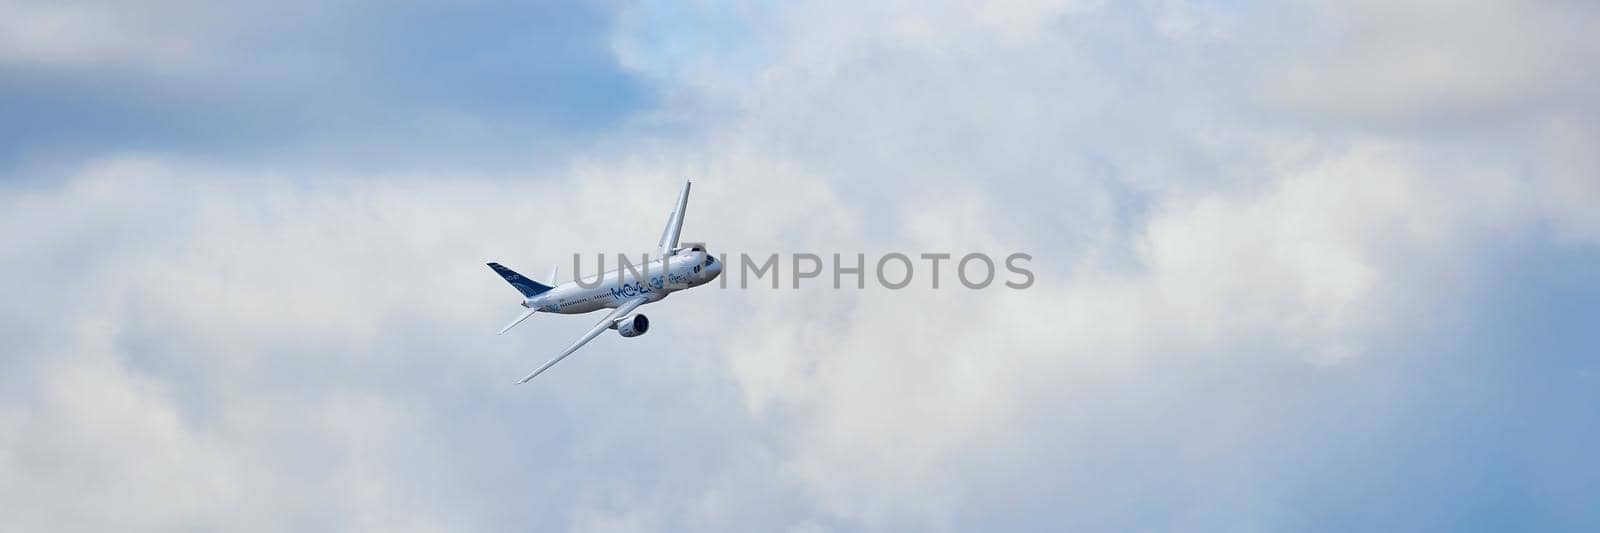 New Russian passenger aircraft MS-21-300 flying prototype of a new Russian civil airliner during test flights on MAKS 2019 airshow. ZHUKOVSKY, RUSSIA, AUGUST 27, 2019.